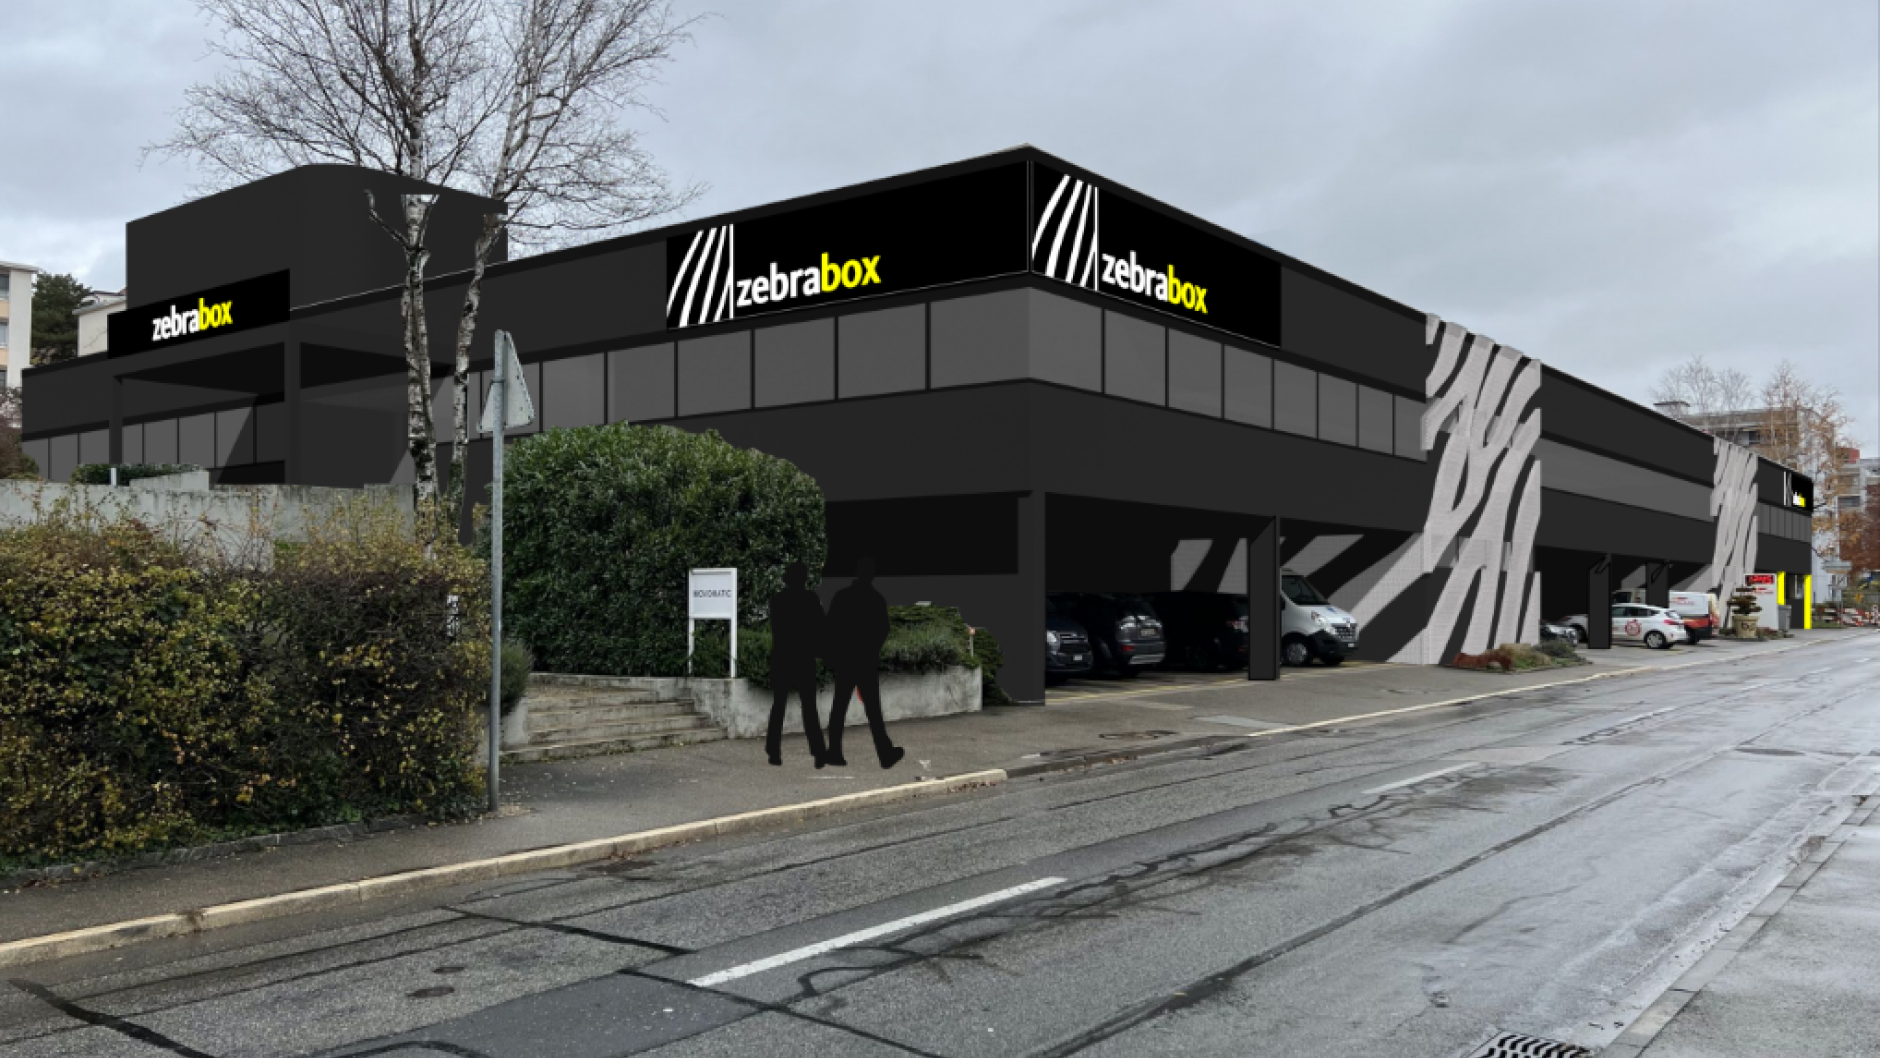 Mockup of the Zebrabox location in Neuchâtel